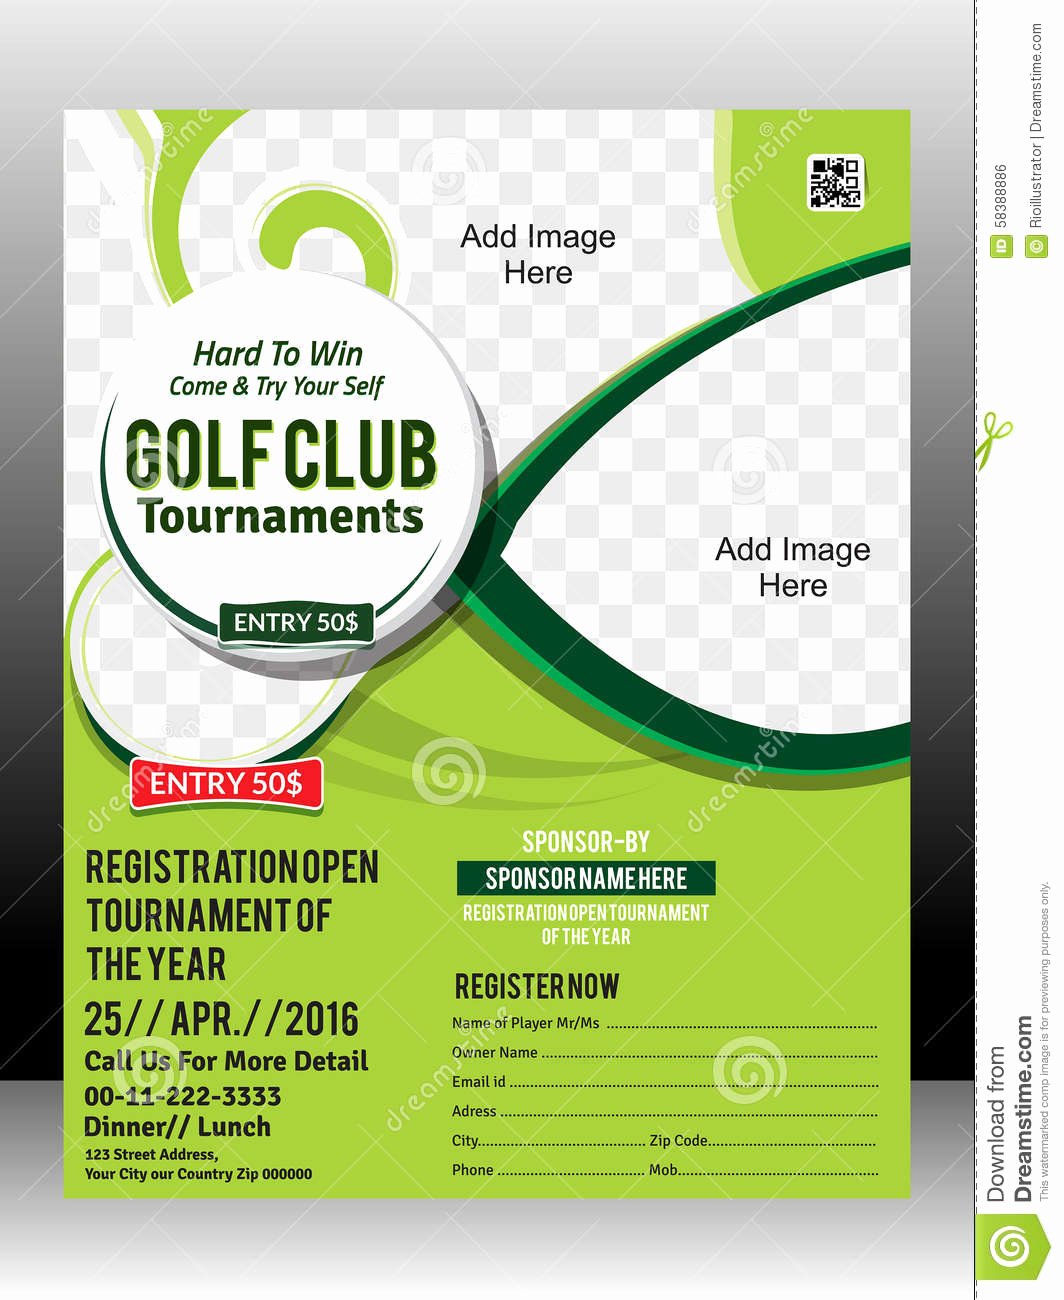 Golf tournament Flyers Template Awesome Free Golf tournament Flyer Template